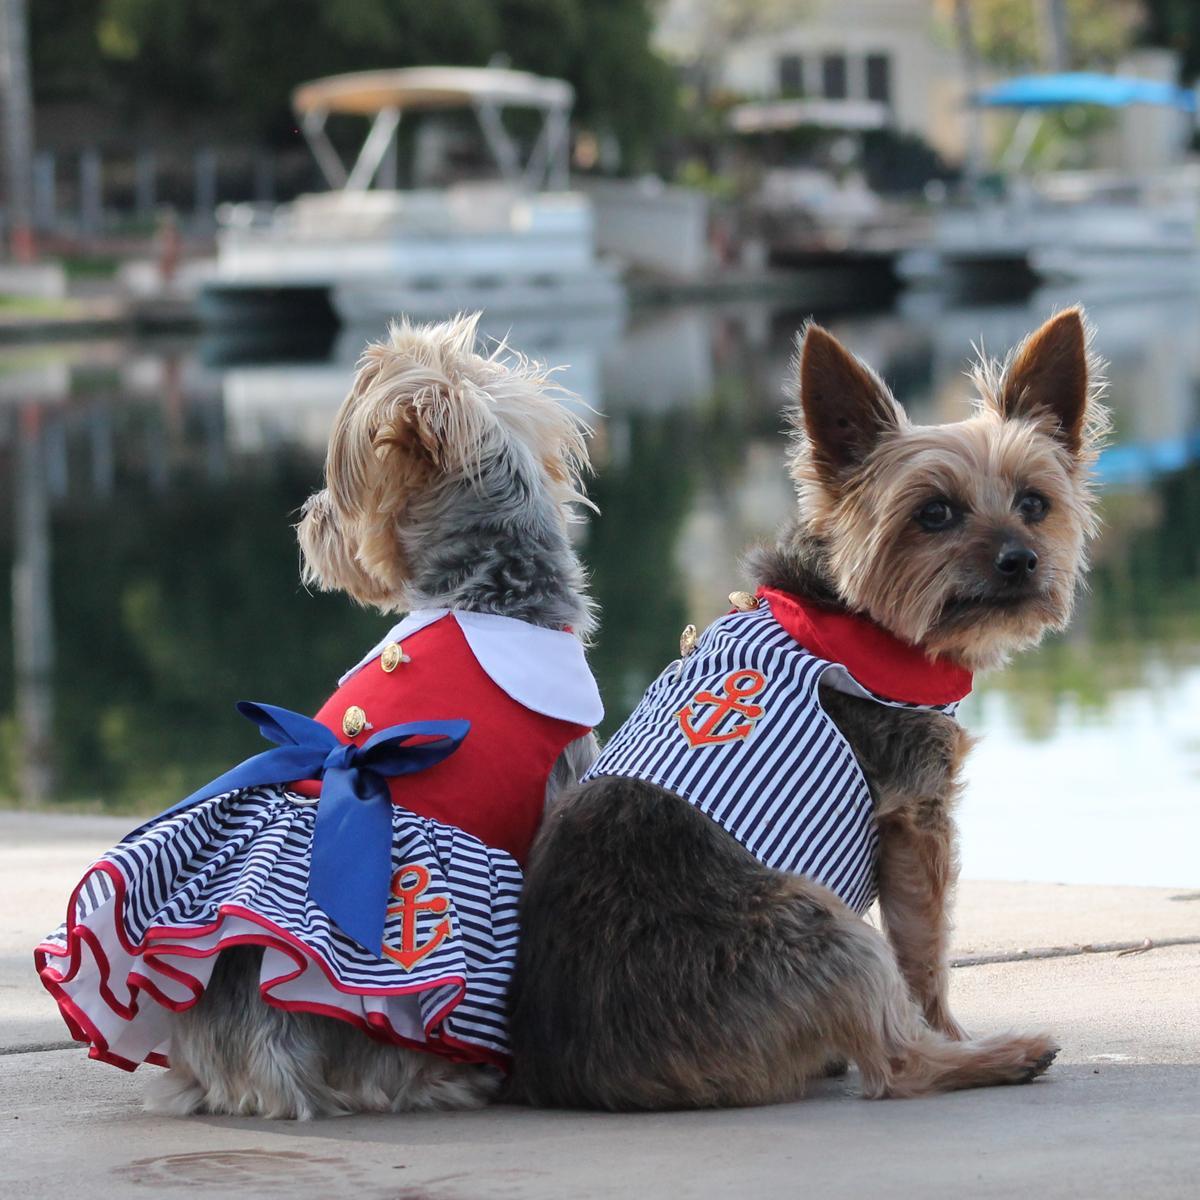 Doggie Design Sailor Boy Fabric Harness with Matching Leash Dog Shirt-Le Pup Pet Supplies and Grooming